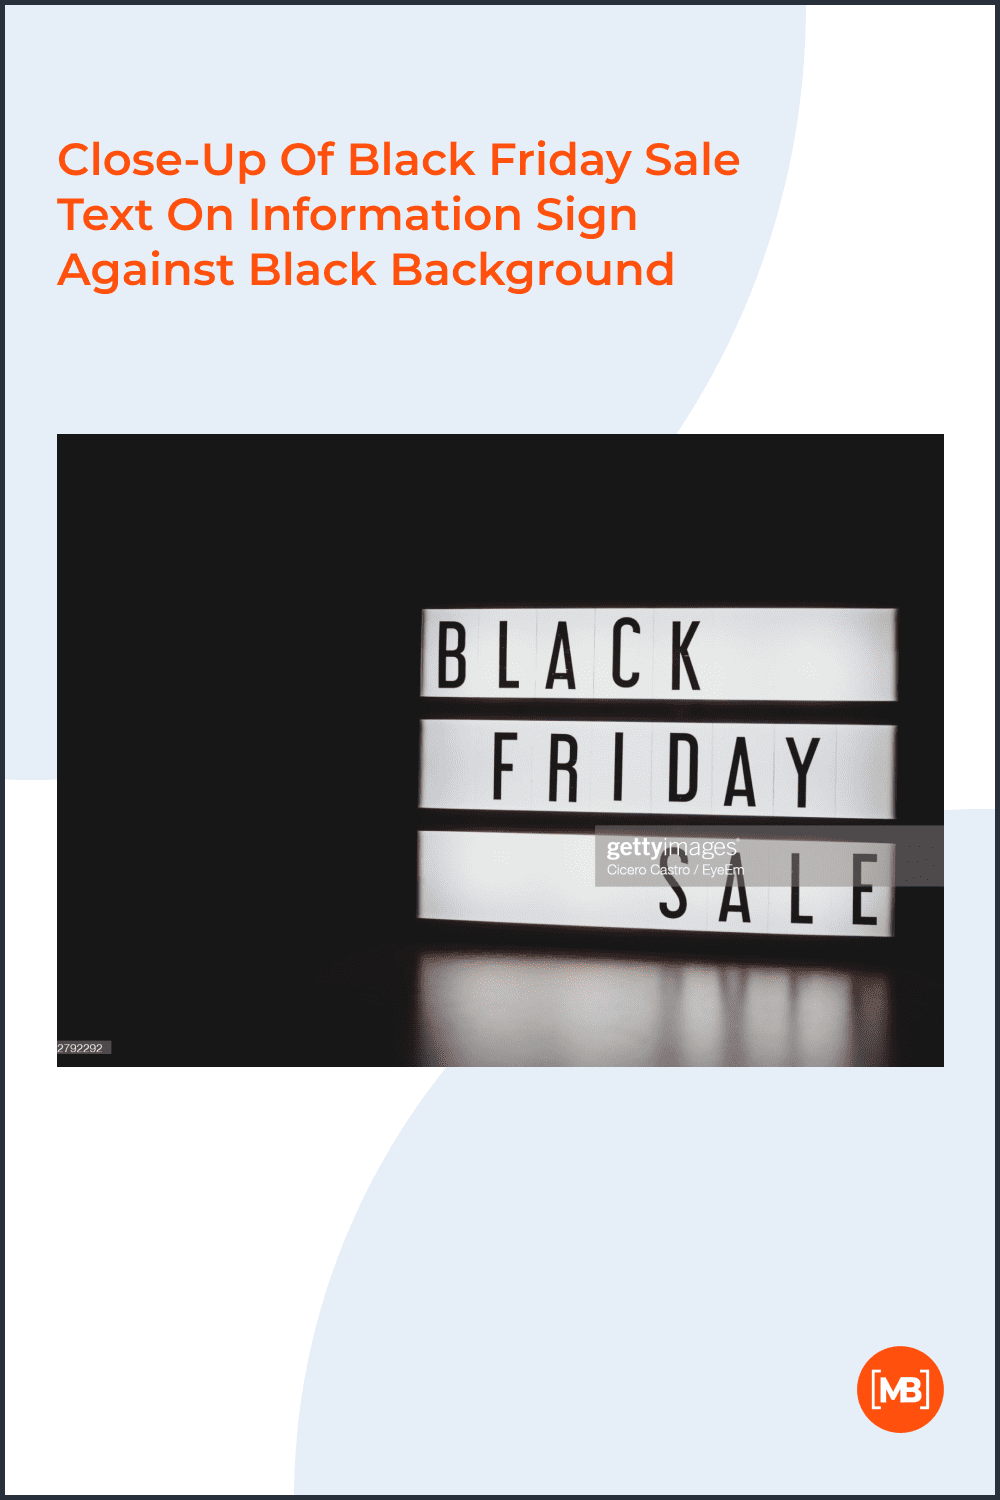 Close-Up of Black Friday sale text on information sign against black background.